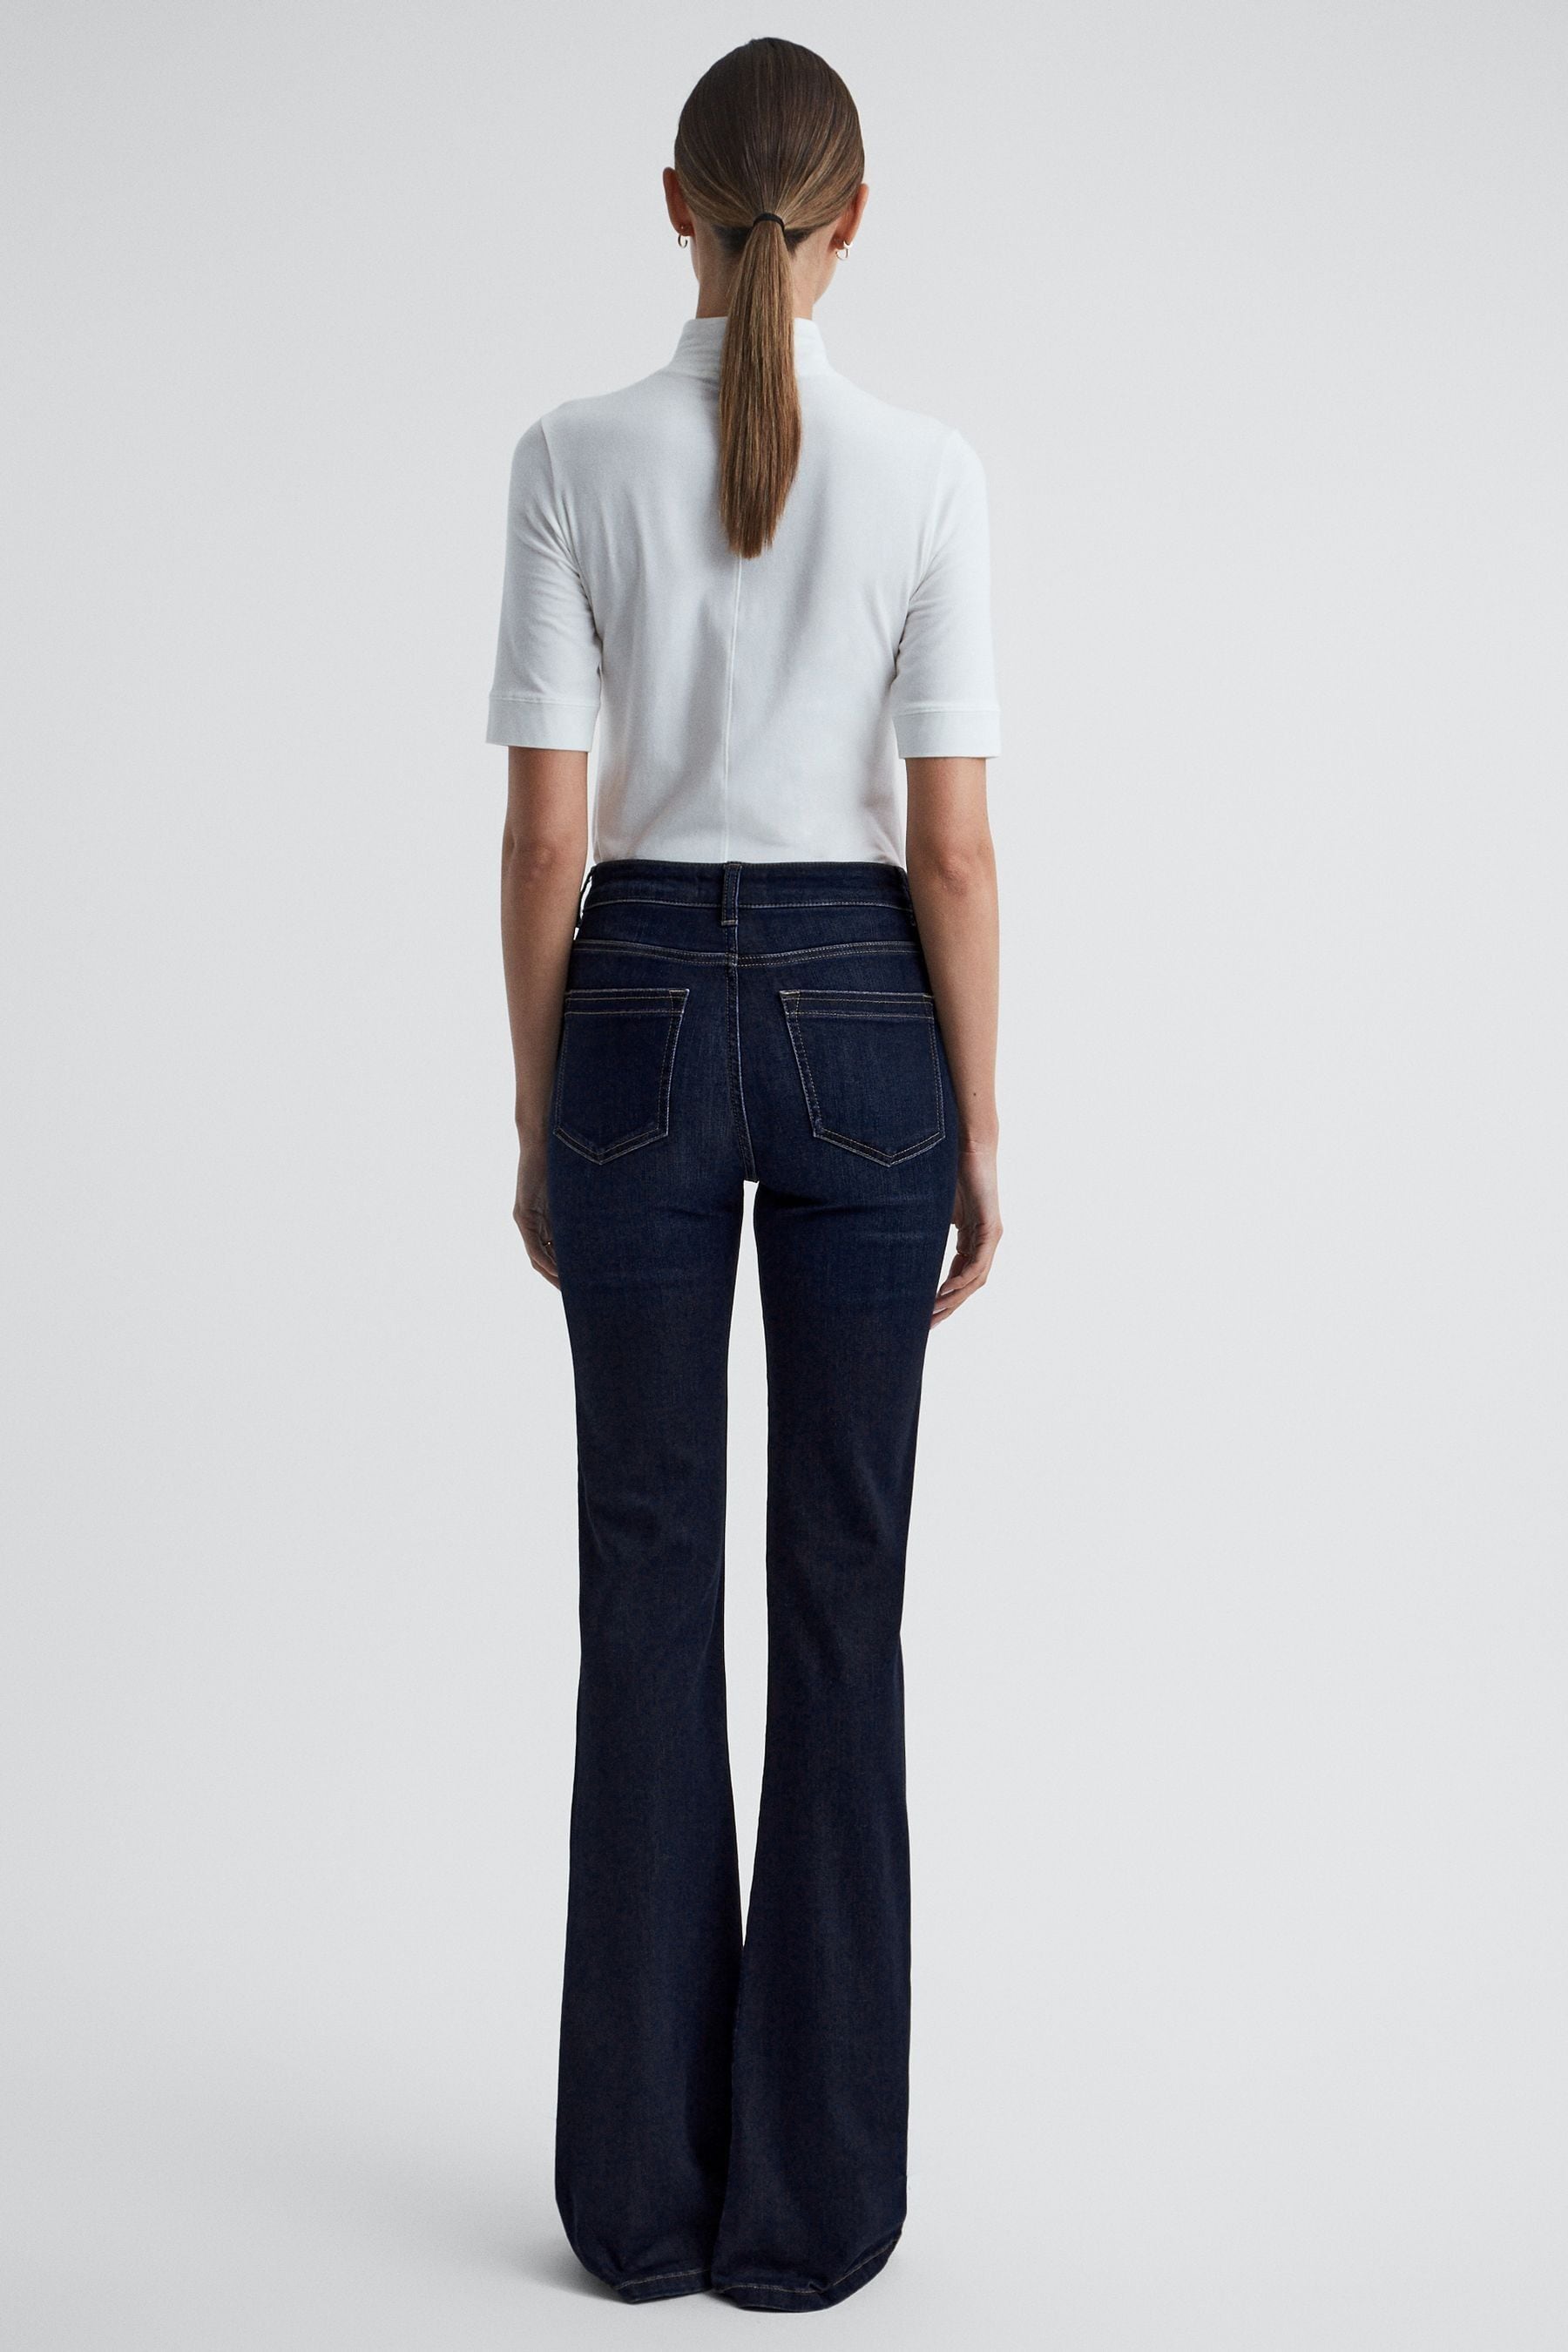 Buy Reiss Dark Indigo Beau High Rise Skinny Flared Jeans from the Next ...